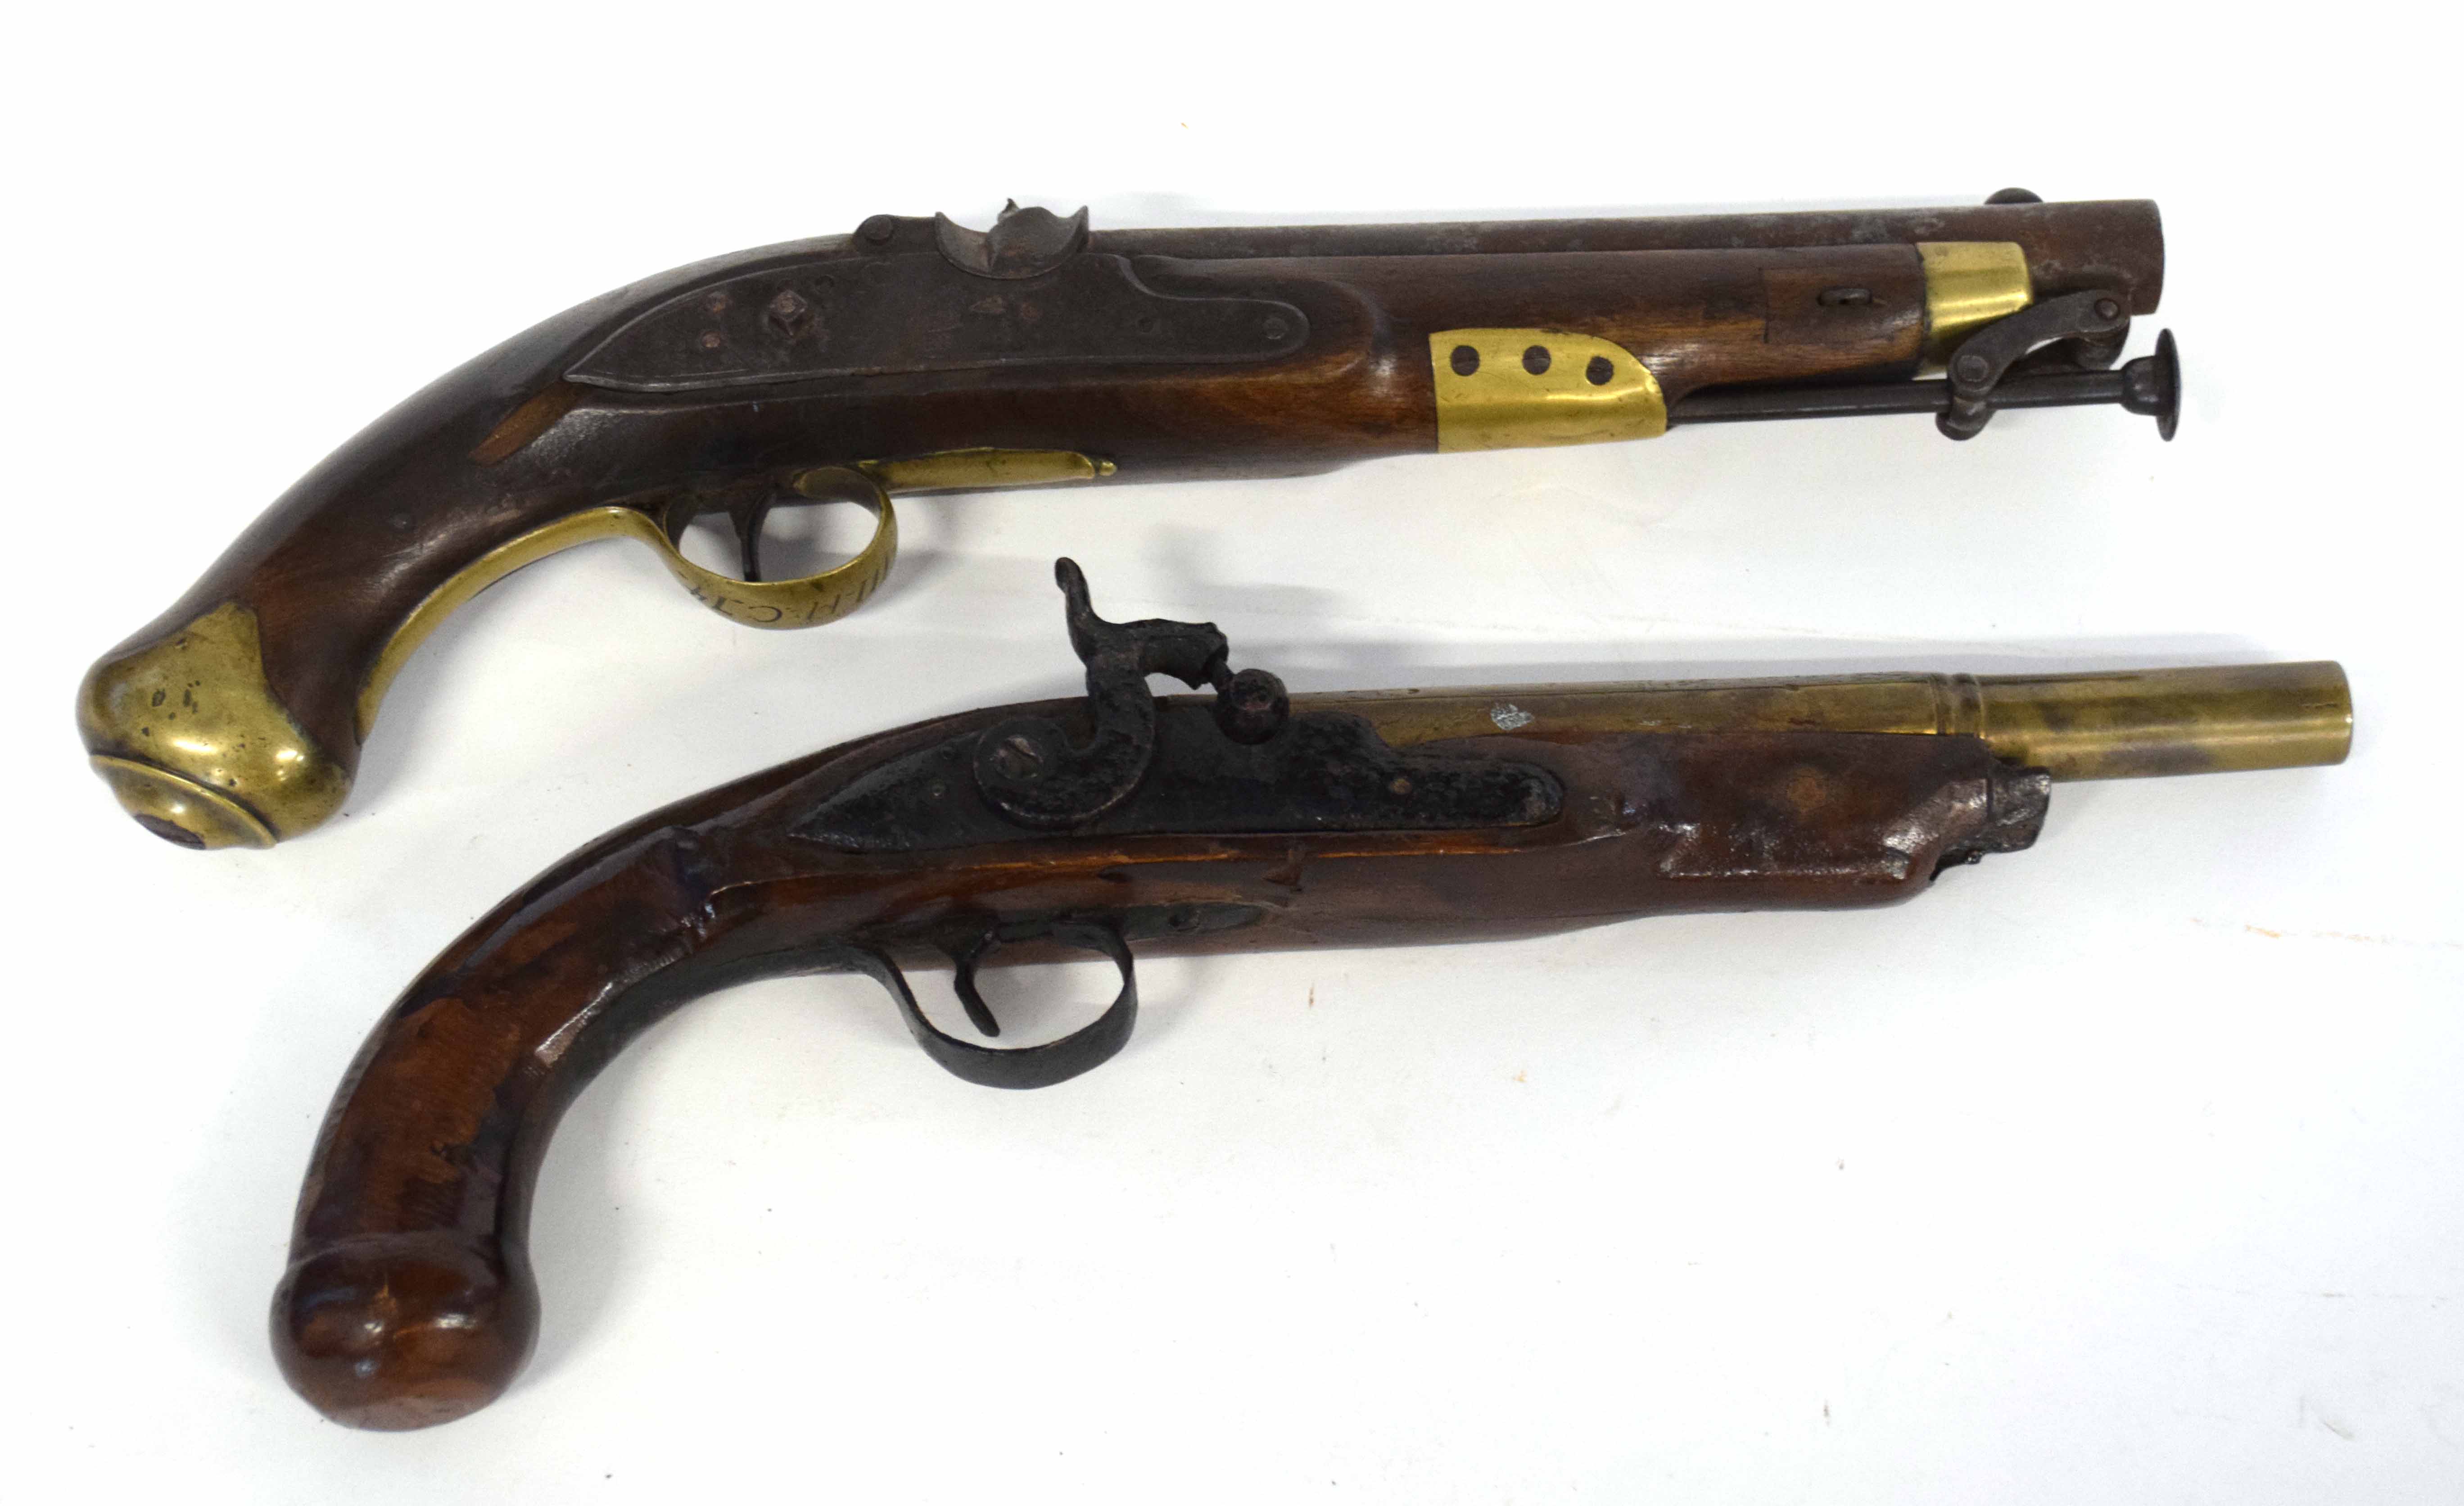 Two pistols, one Georgian Tower flintlock pistol converted to percussion cap, with brass butt cap,